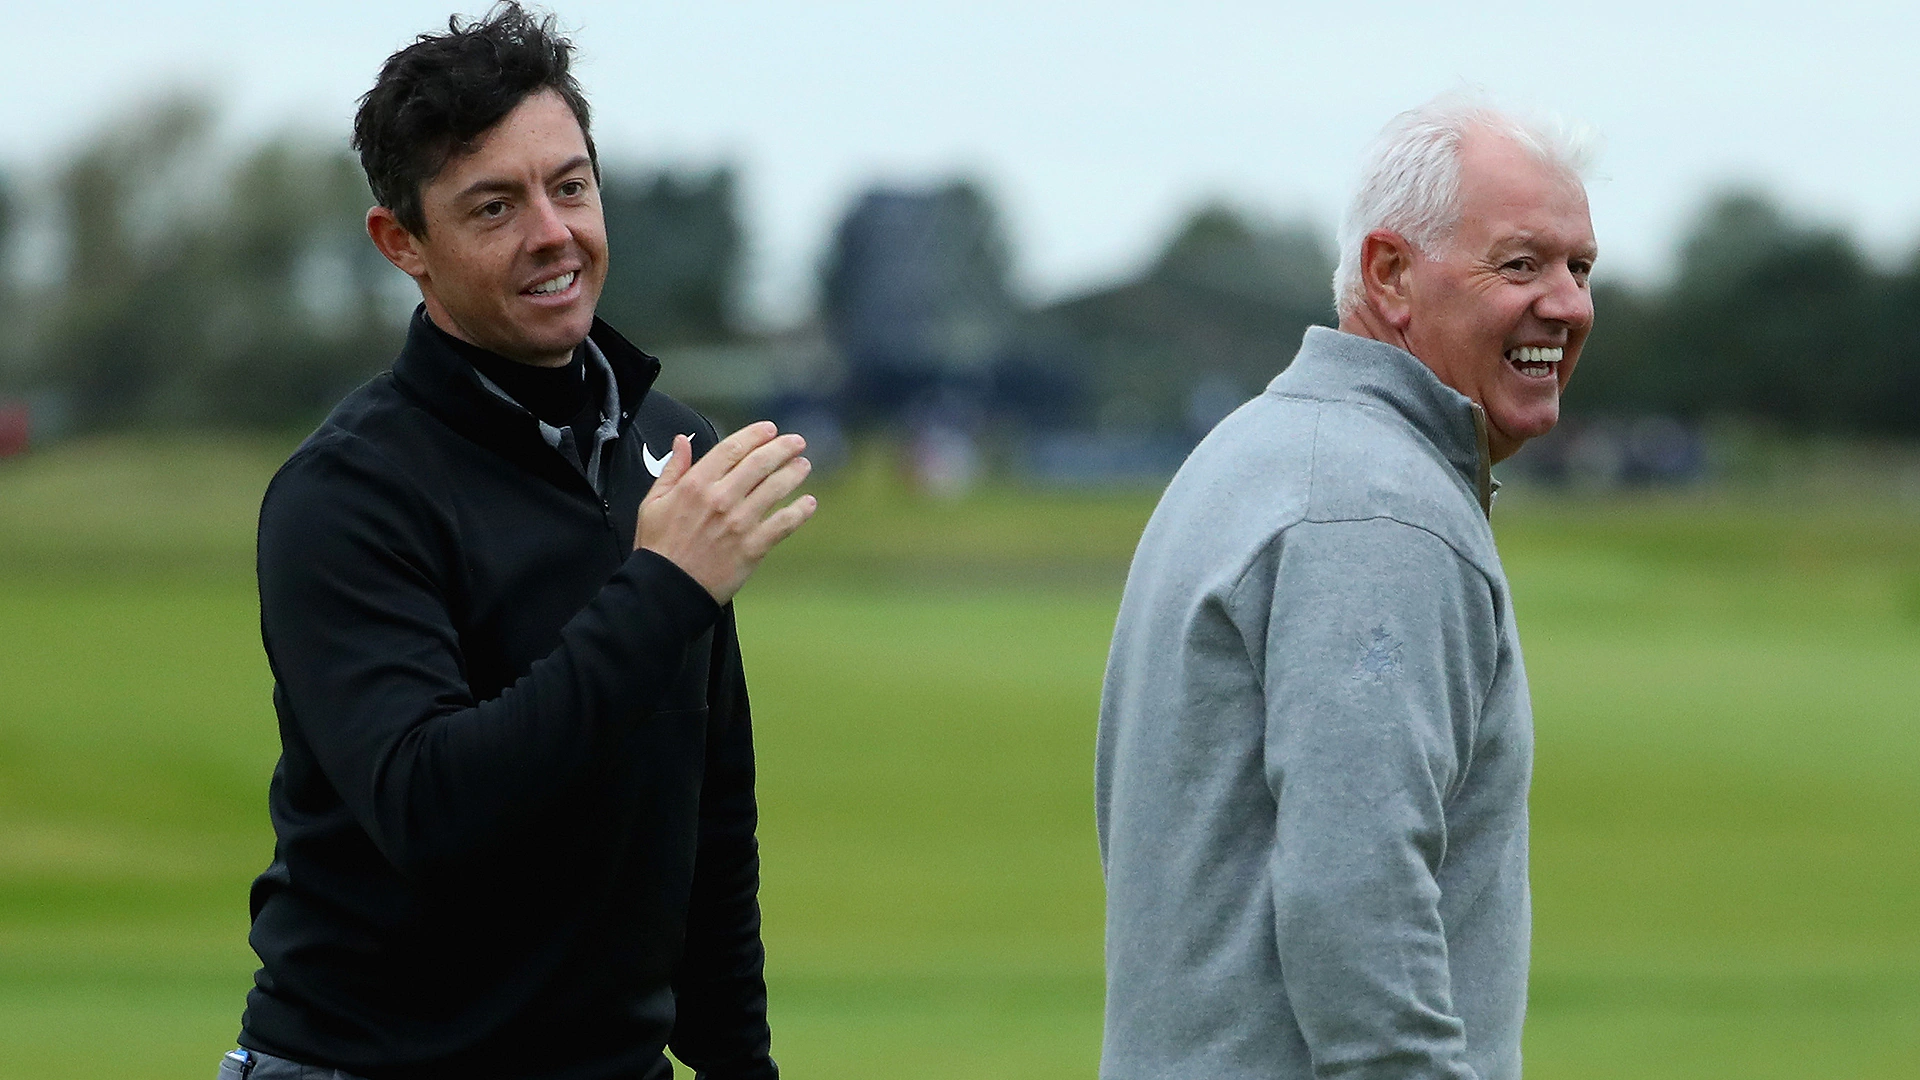 Playing with dad this week, McIlroy eyeing Augusta